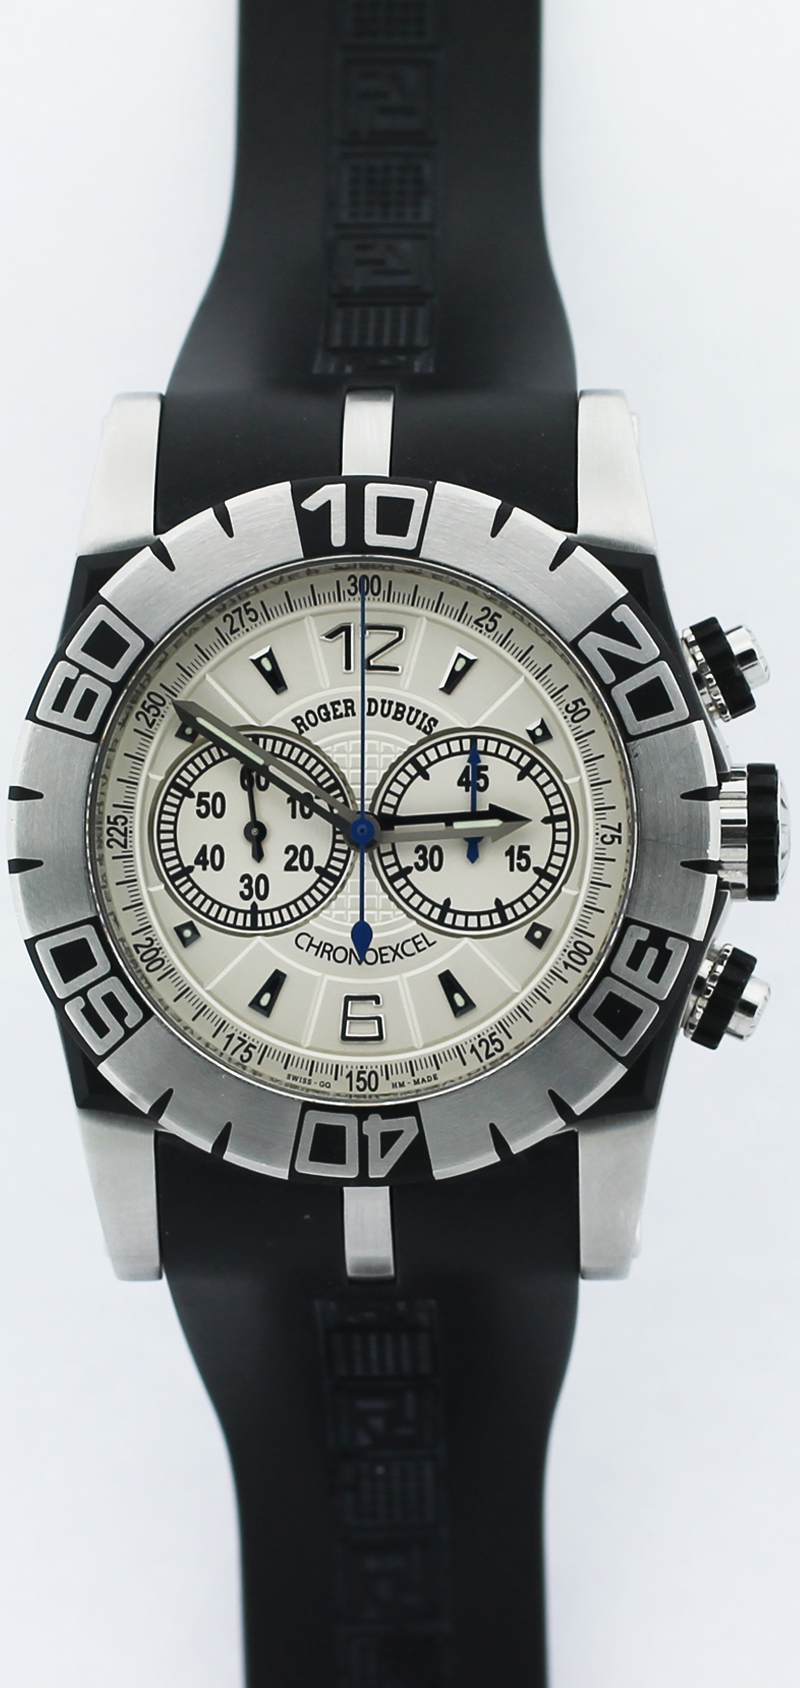 Roger Dubuis Steel Silver Dial Chronoexcel SED46-78-C9.N-CPG3.13R Easy Diver on Rubber Strap